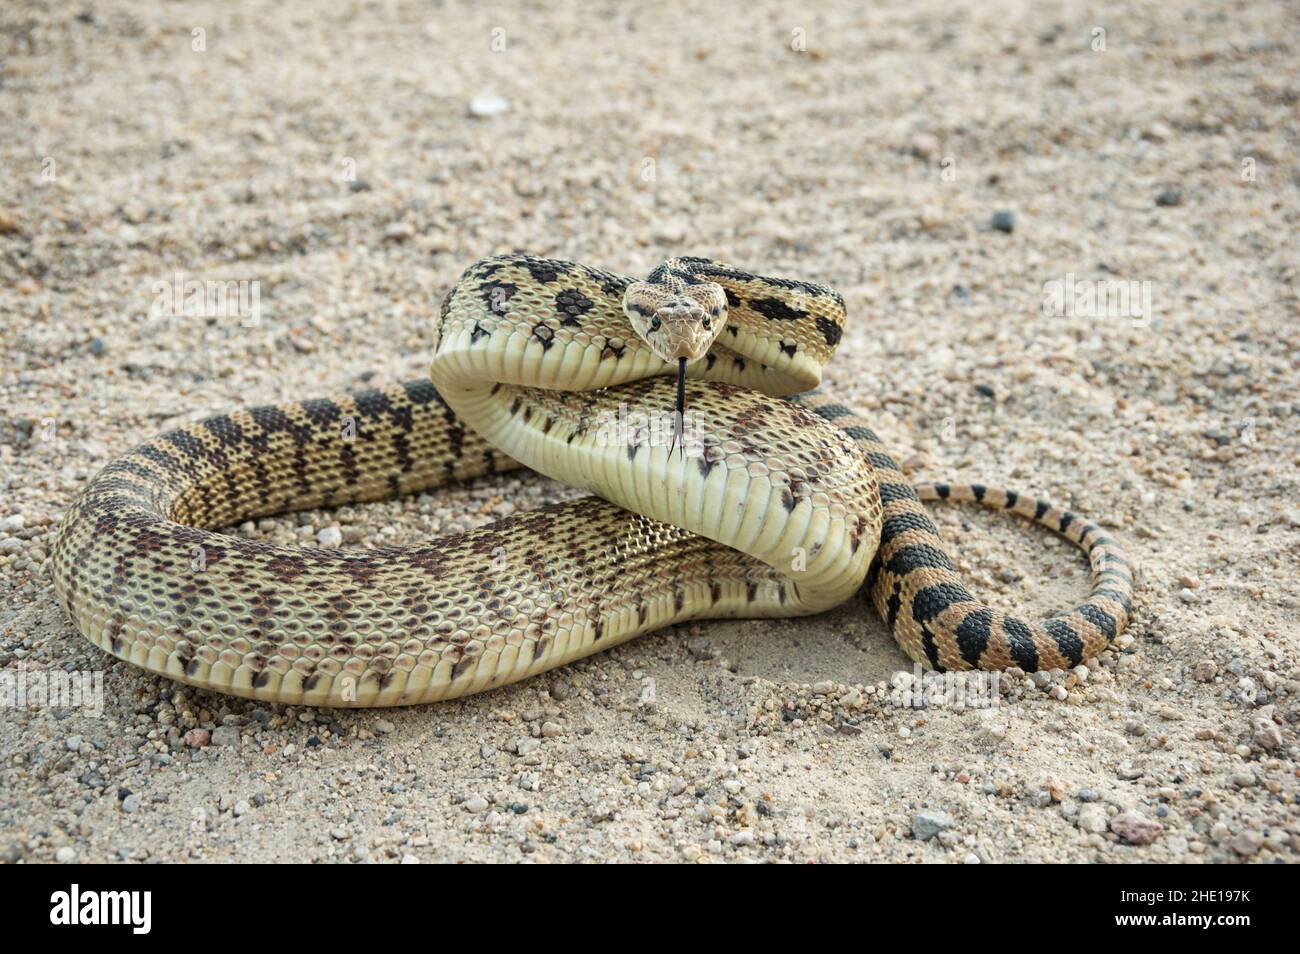 gopher snake or Pituophis catenifer curled up mimicking a rattlesnake on a dirt road Stock Photo